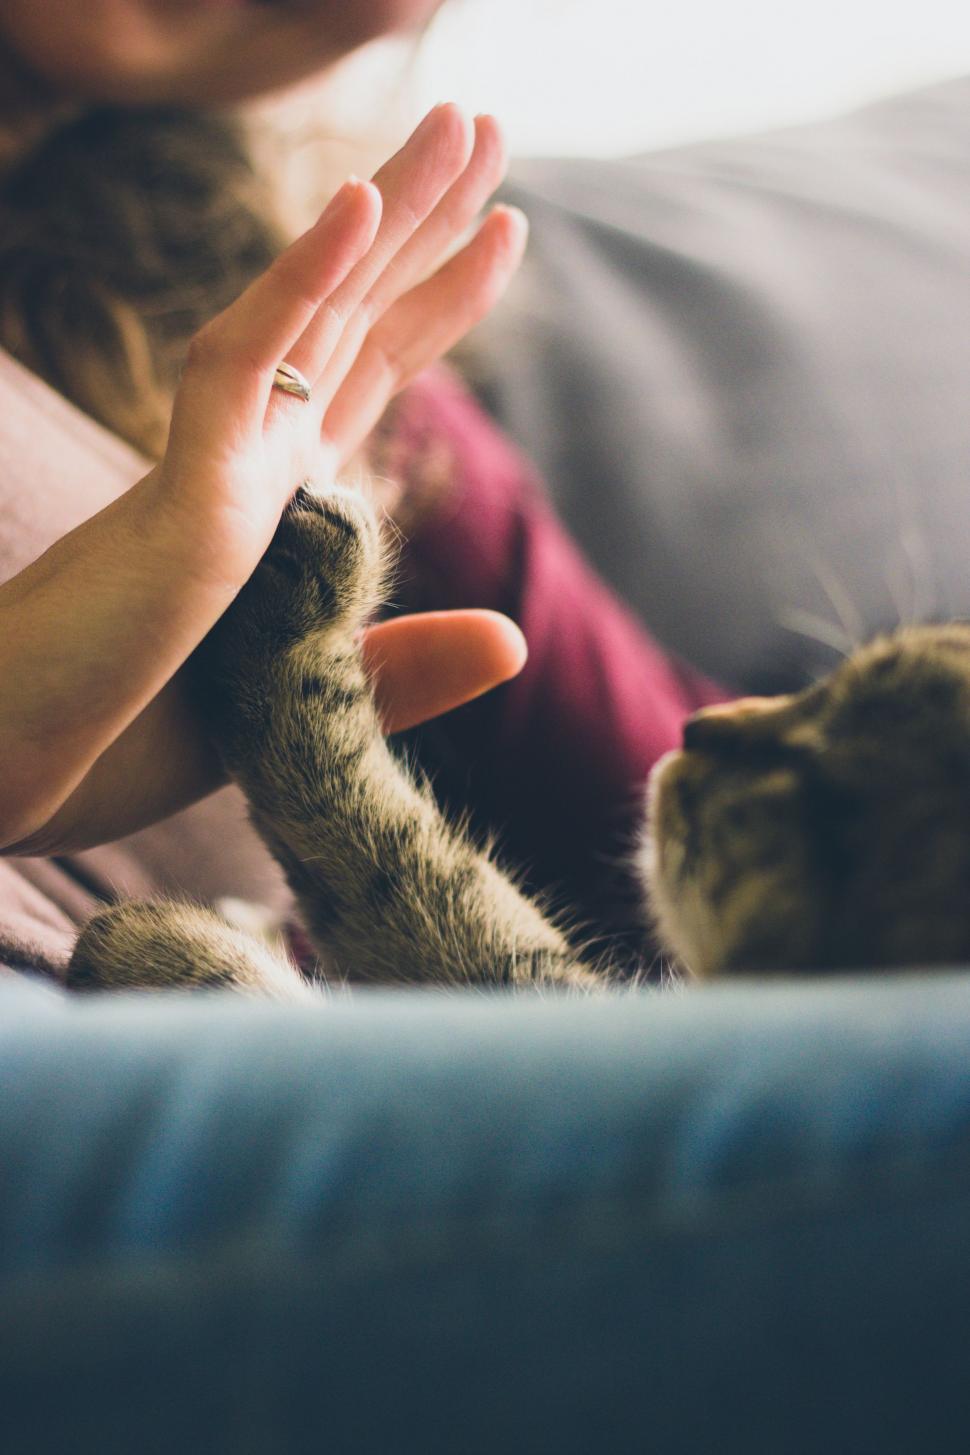 Free Image of Woman Holding Cat in Hands 